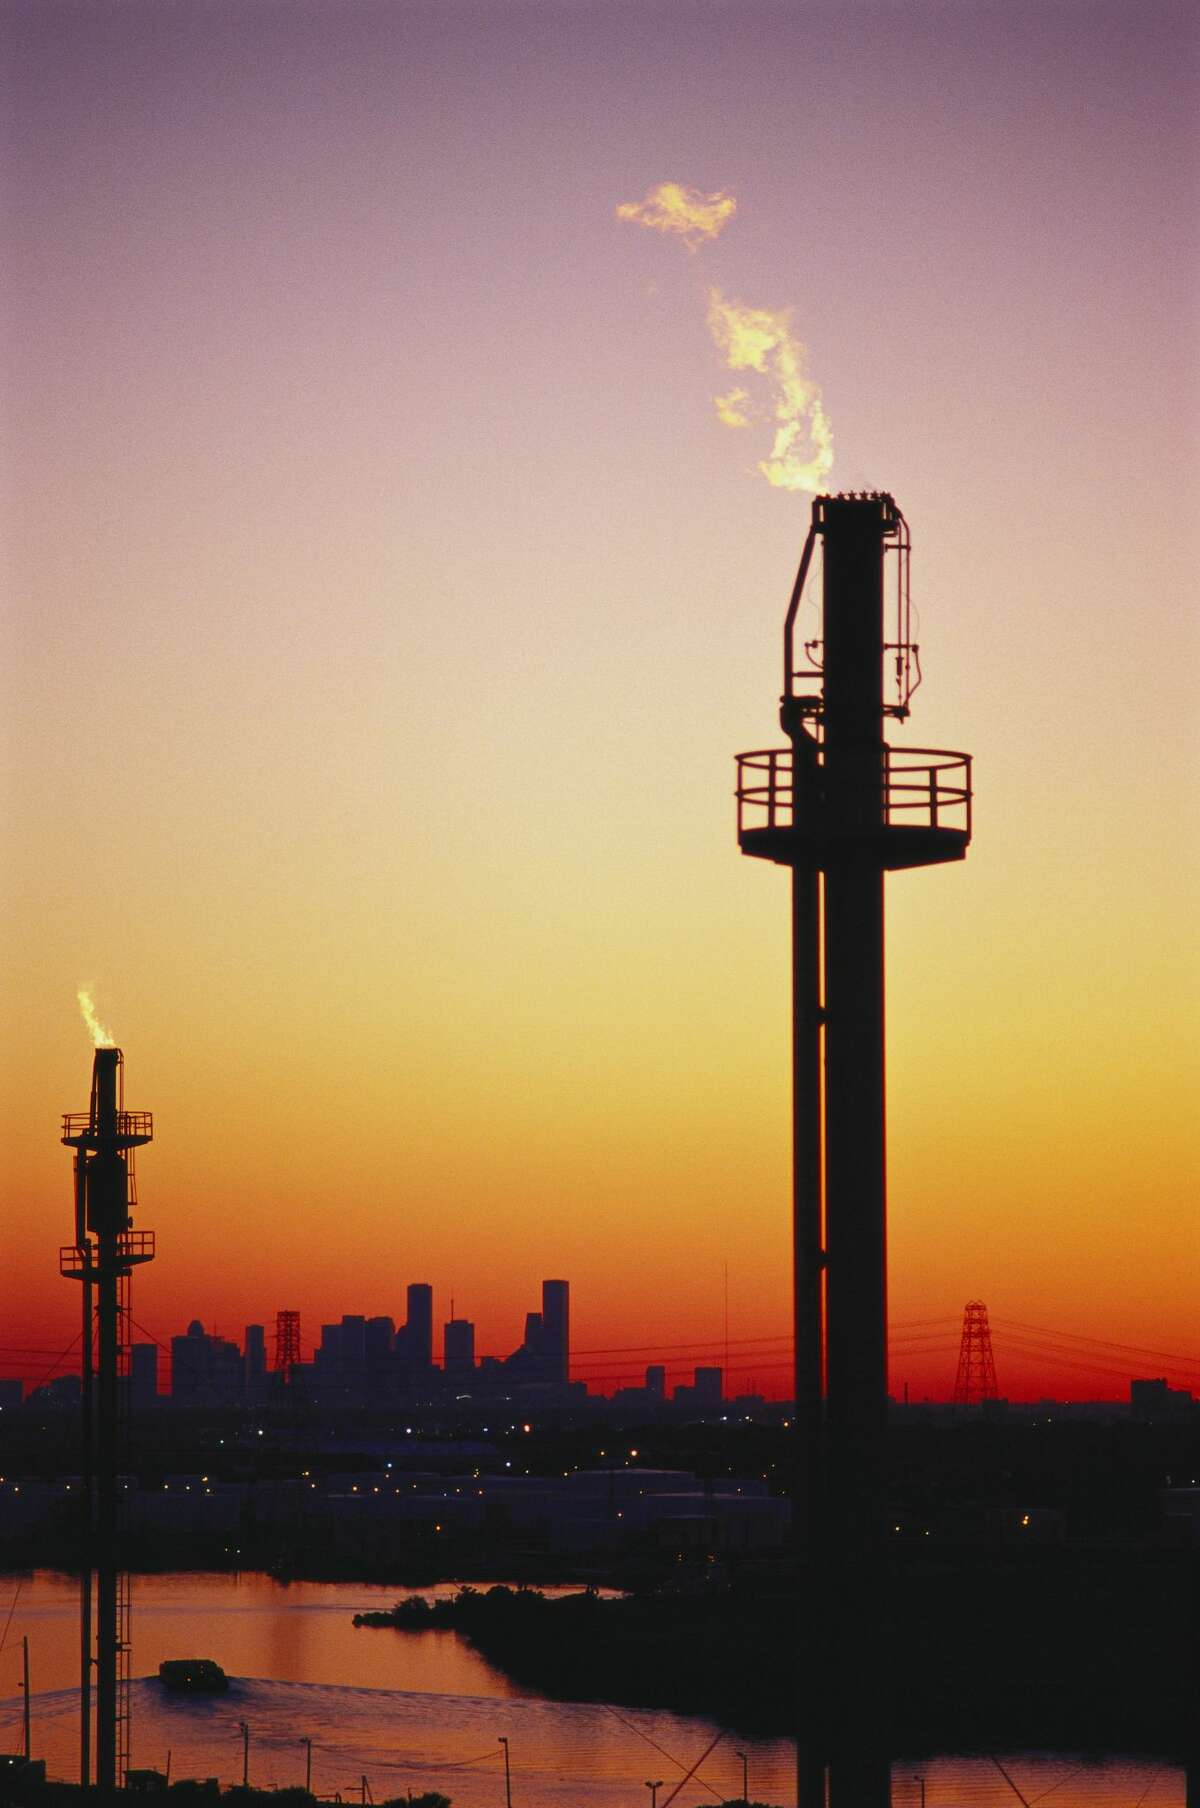 An oil refinery near Houston, Texas. Texas' known petroleum deposits make up approximately a fourth of the United States' oil reserves.